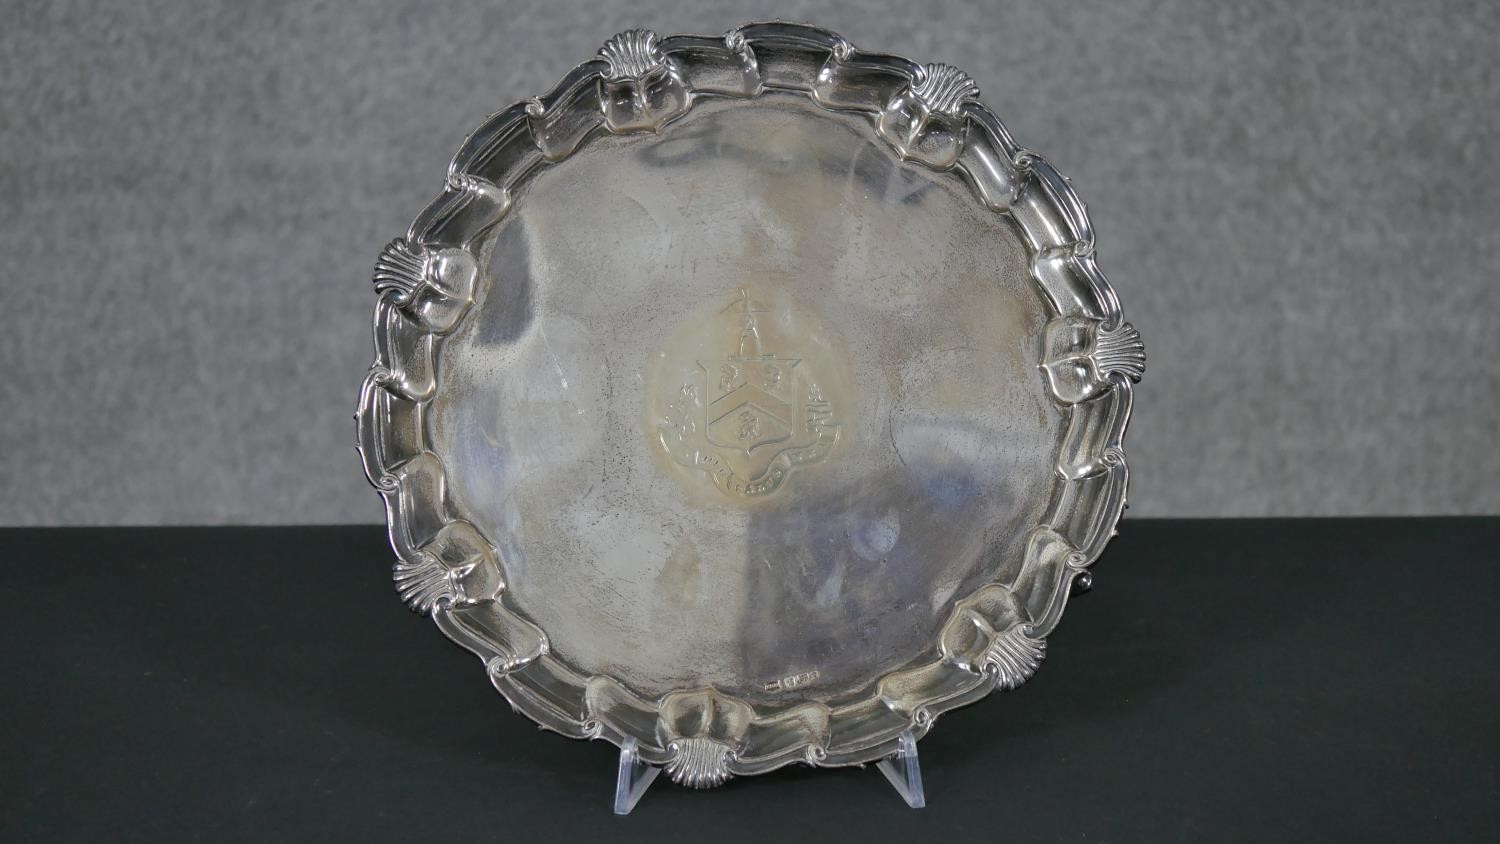 A circular silver salver with shell and scroll border, engraved with crest and motto, on three